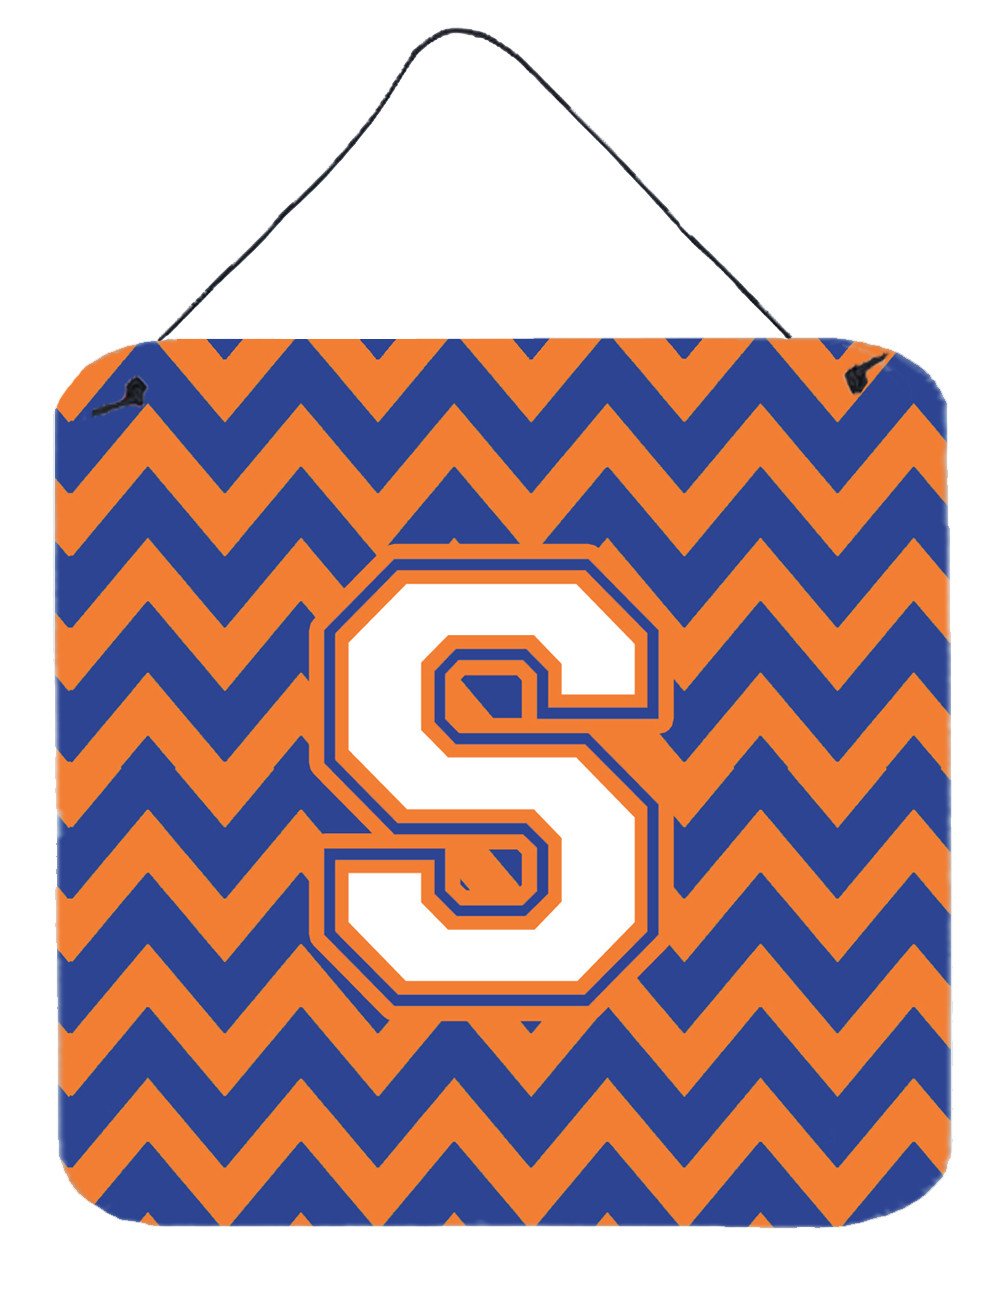 Letter S Chevron Blue and Orange #3 Wall or Door Hanging Prints CJ1060-SDS66 by Caroline's Treasures